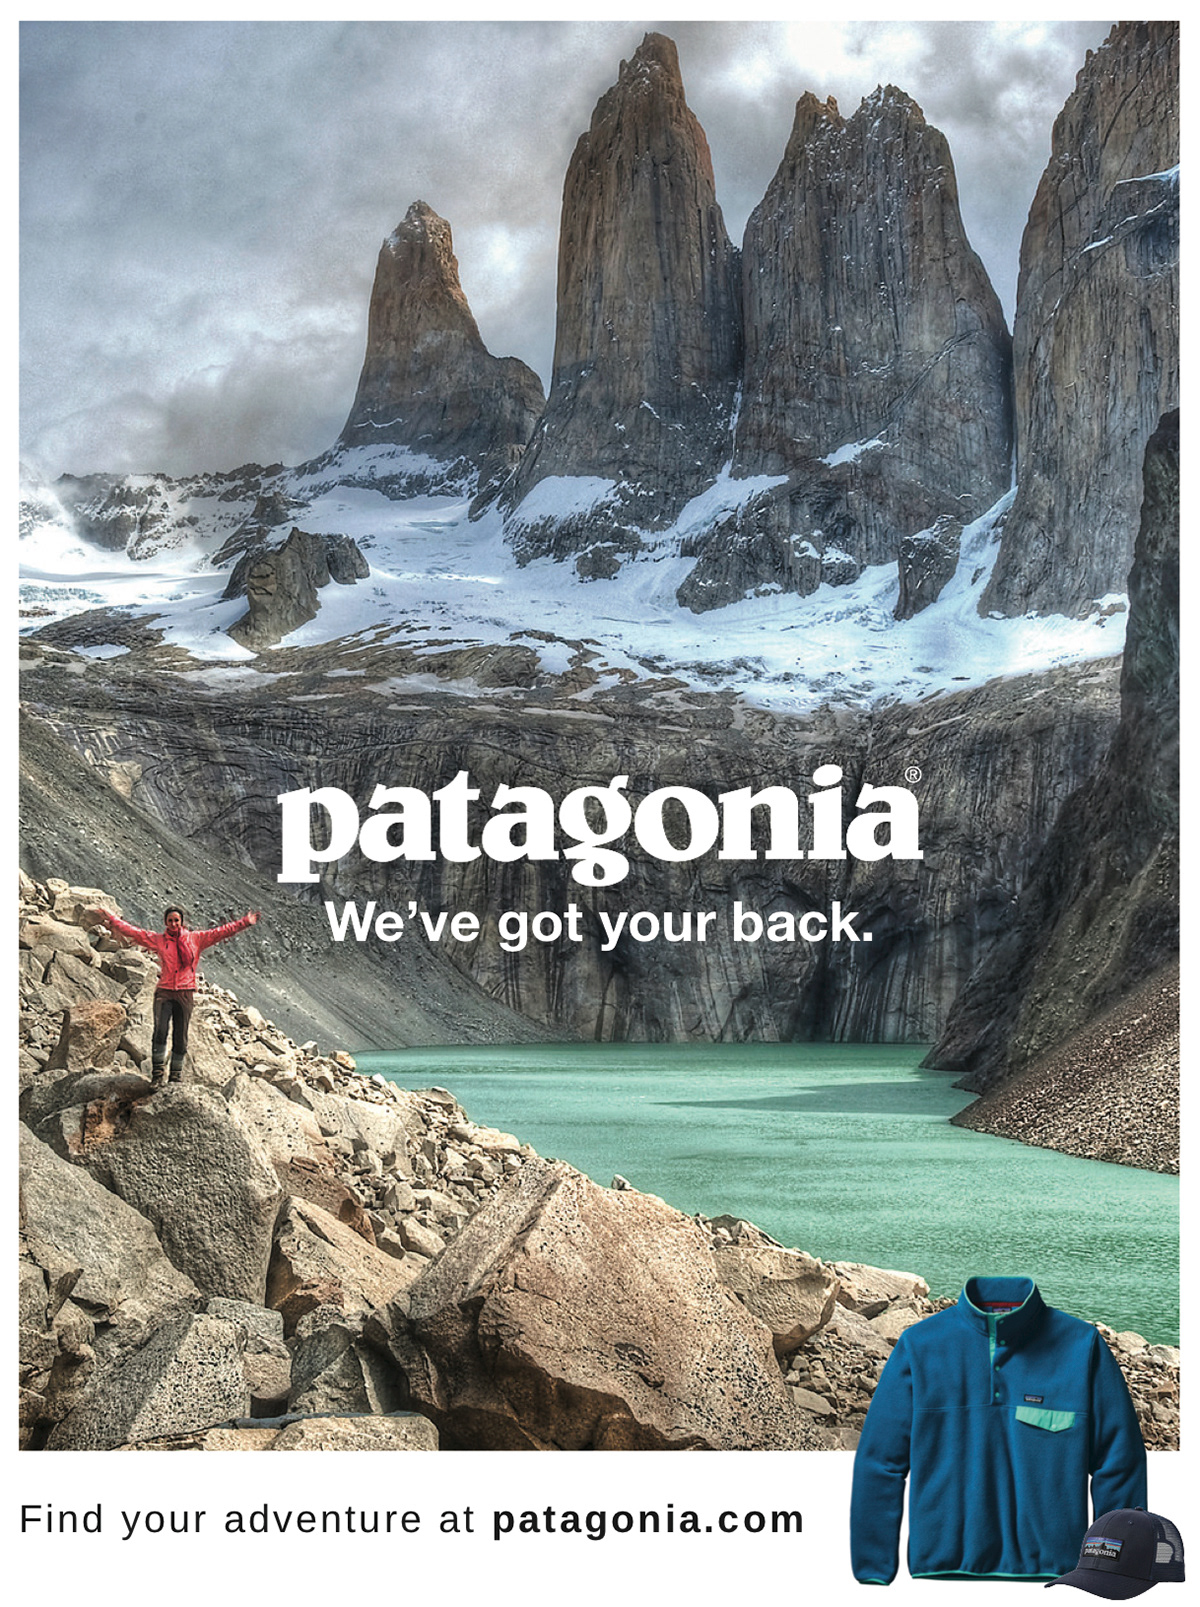 Patagonia we're got your back ad.